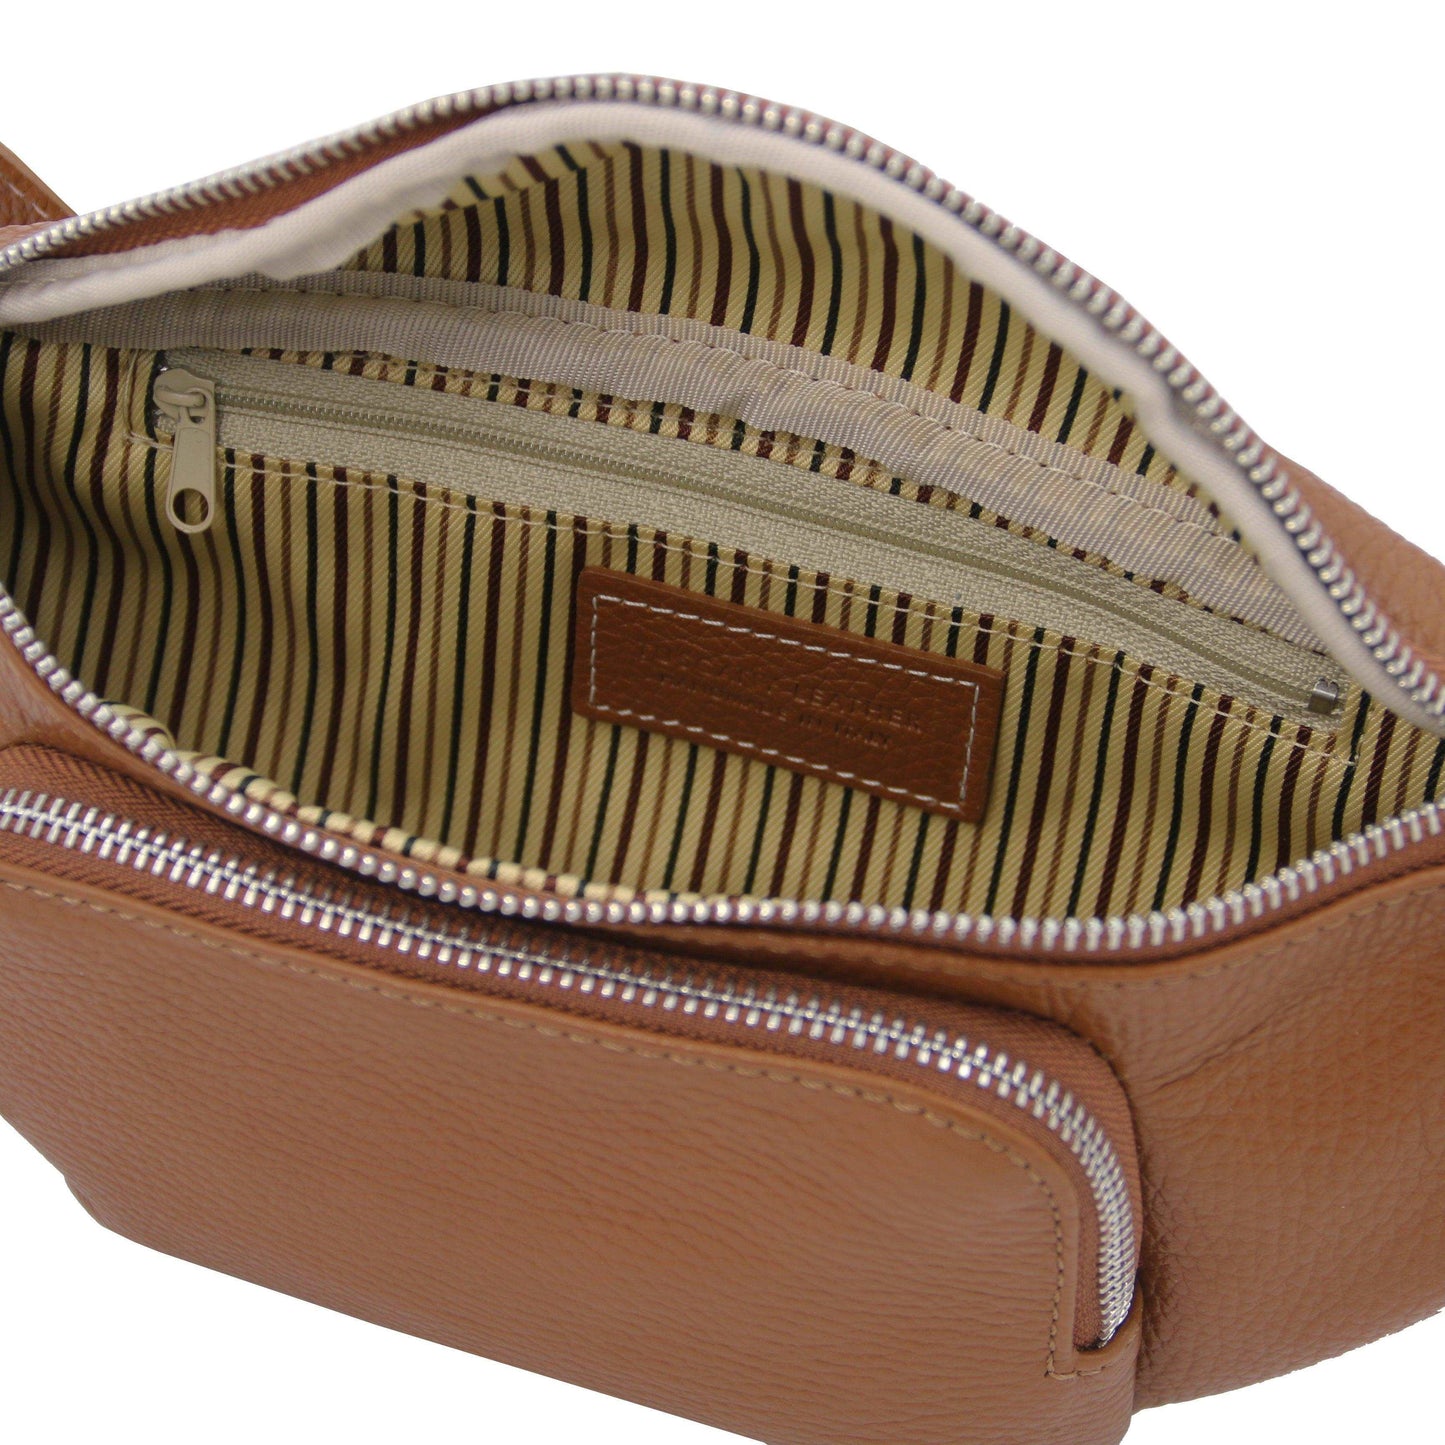 Anthony - Soft leather fanny pack | TL142155 - Premium Leather bags for men - Just €73.20! Shop now at San Rocco Italia